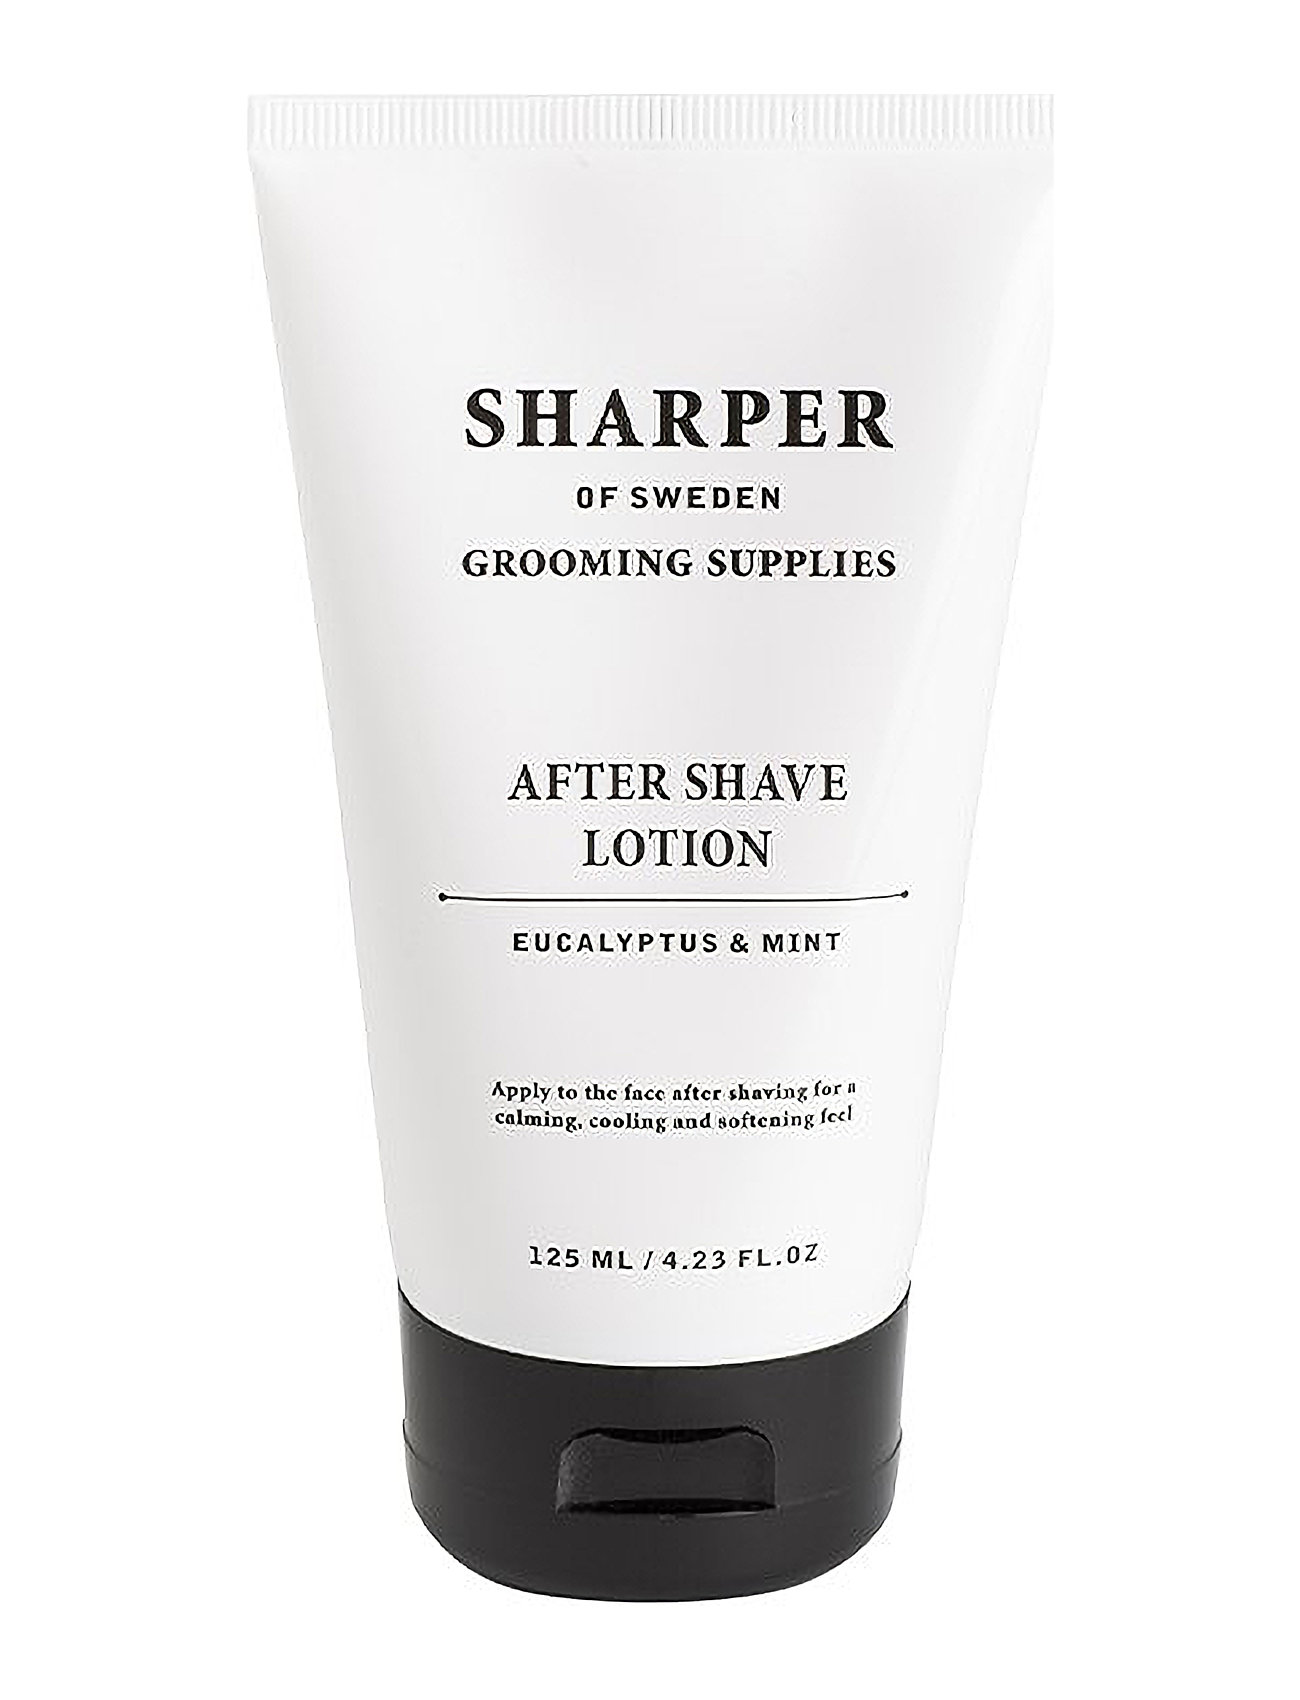 Sharper After Shave Lotion Beauty Men Shaving Products After Shave Nude Sharper Grooming